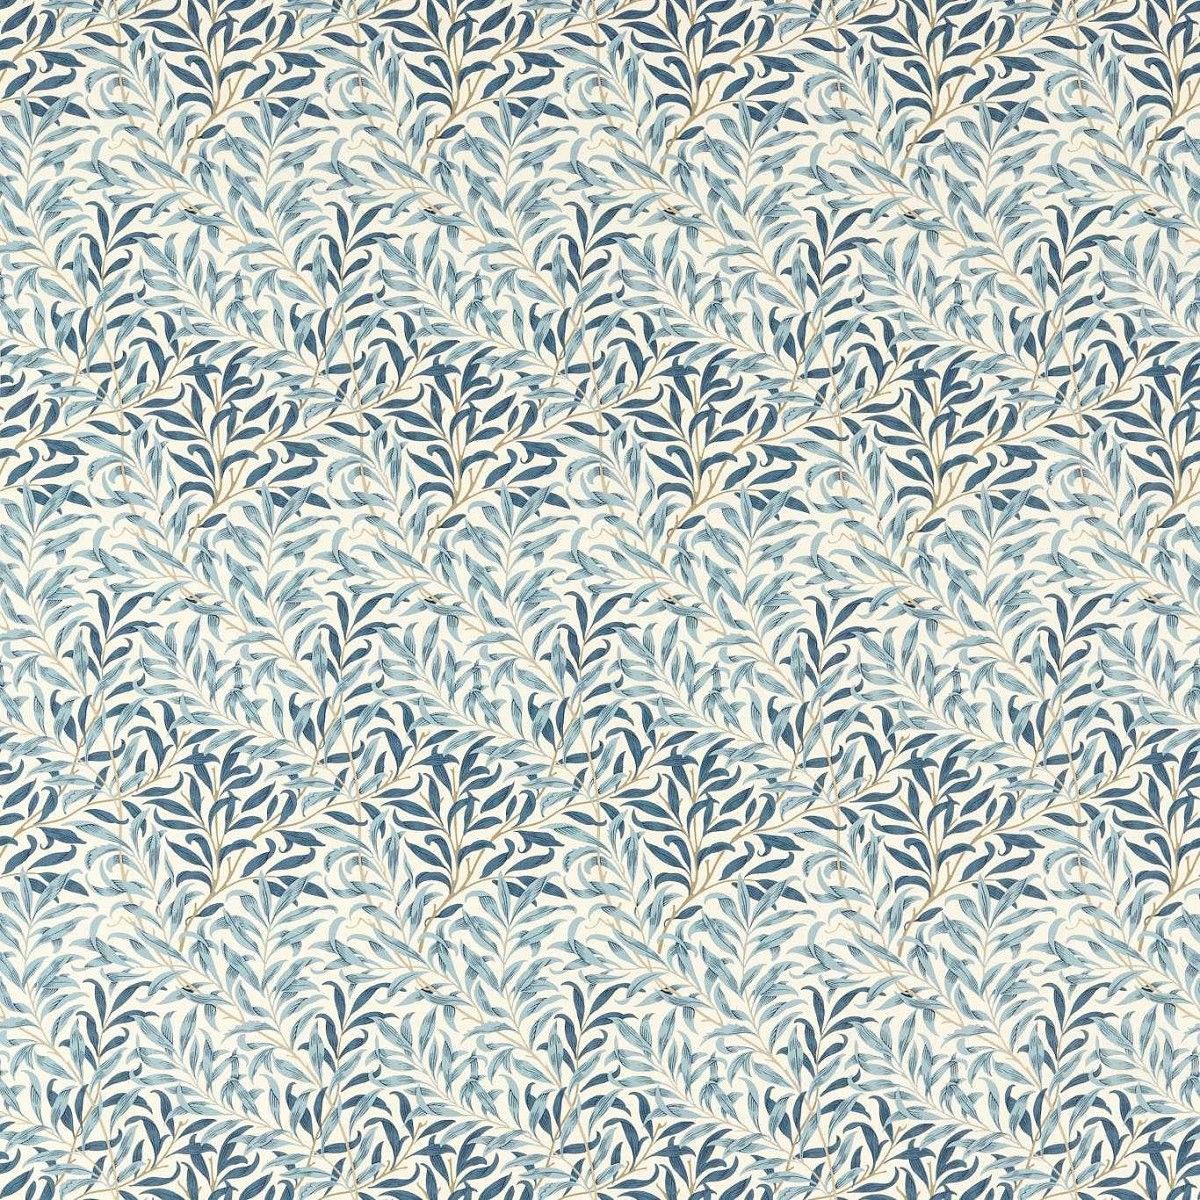 Willow Bough Outdoor Indigo Fabric by William Morris & Co.